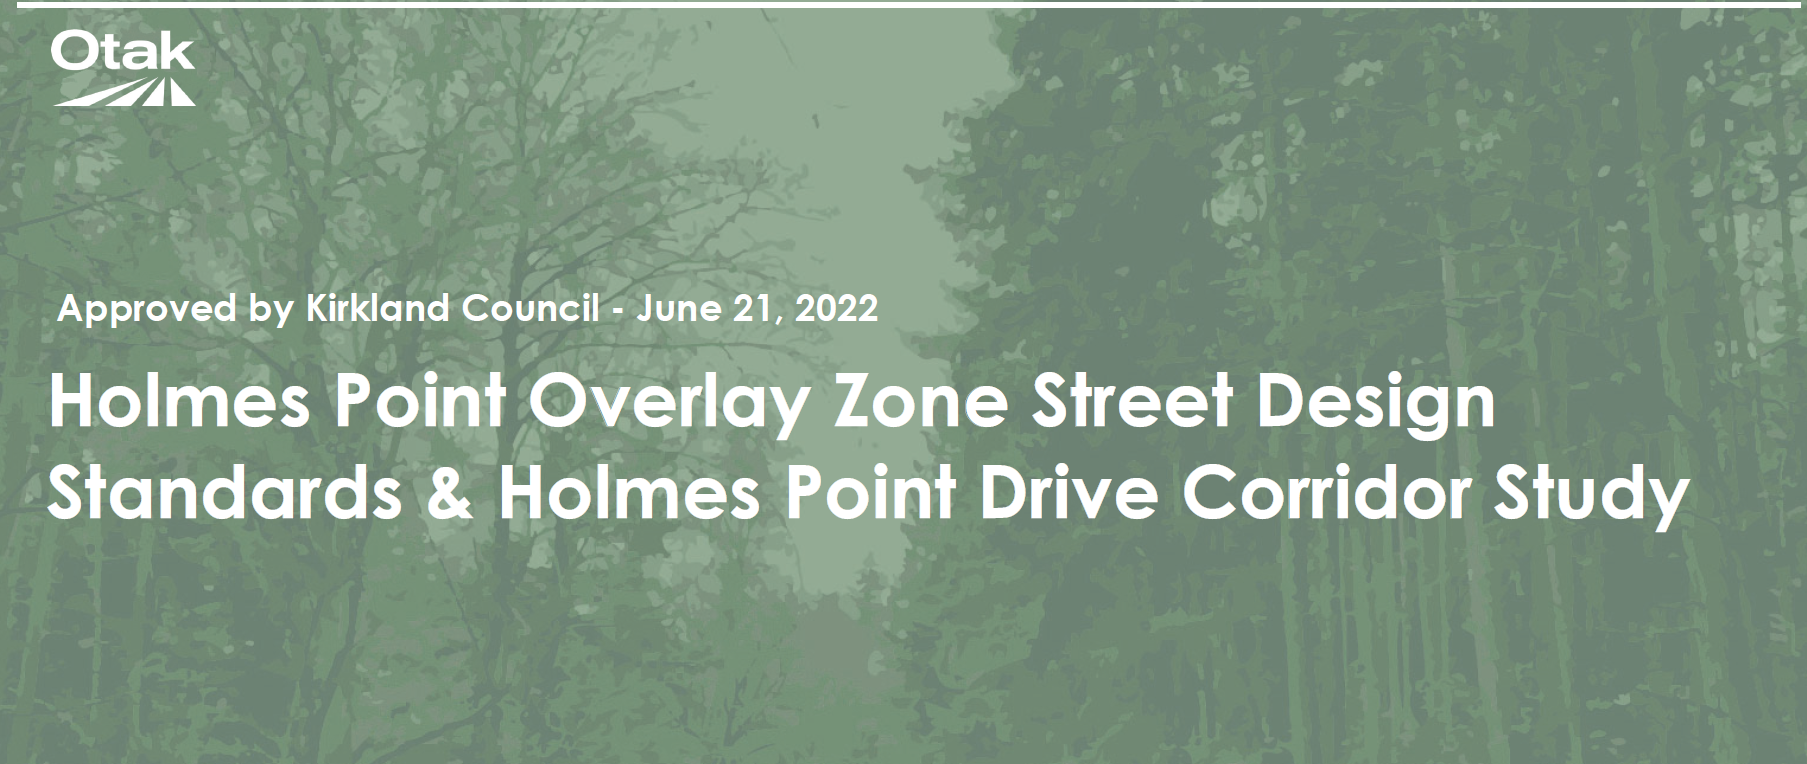 Link to the final Holmes Point Overlay Zone Street Design Standards and Holmes Point Drive Corridor Study